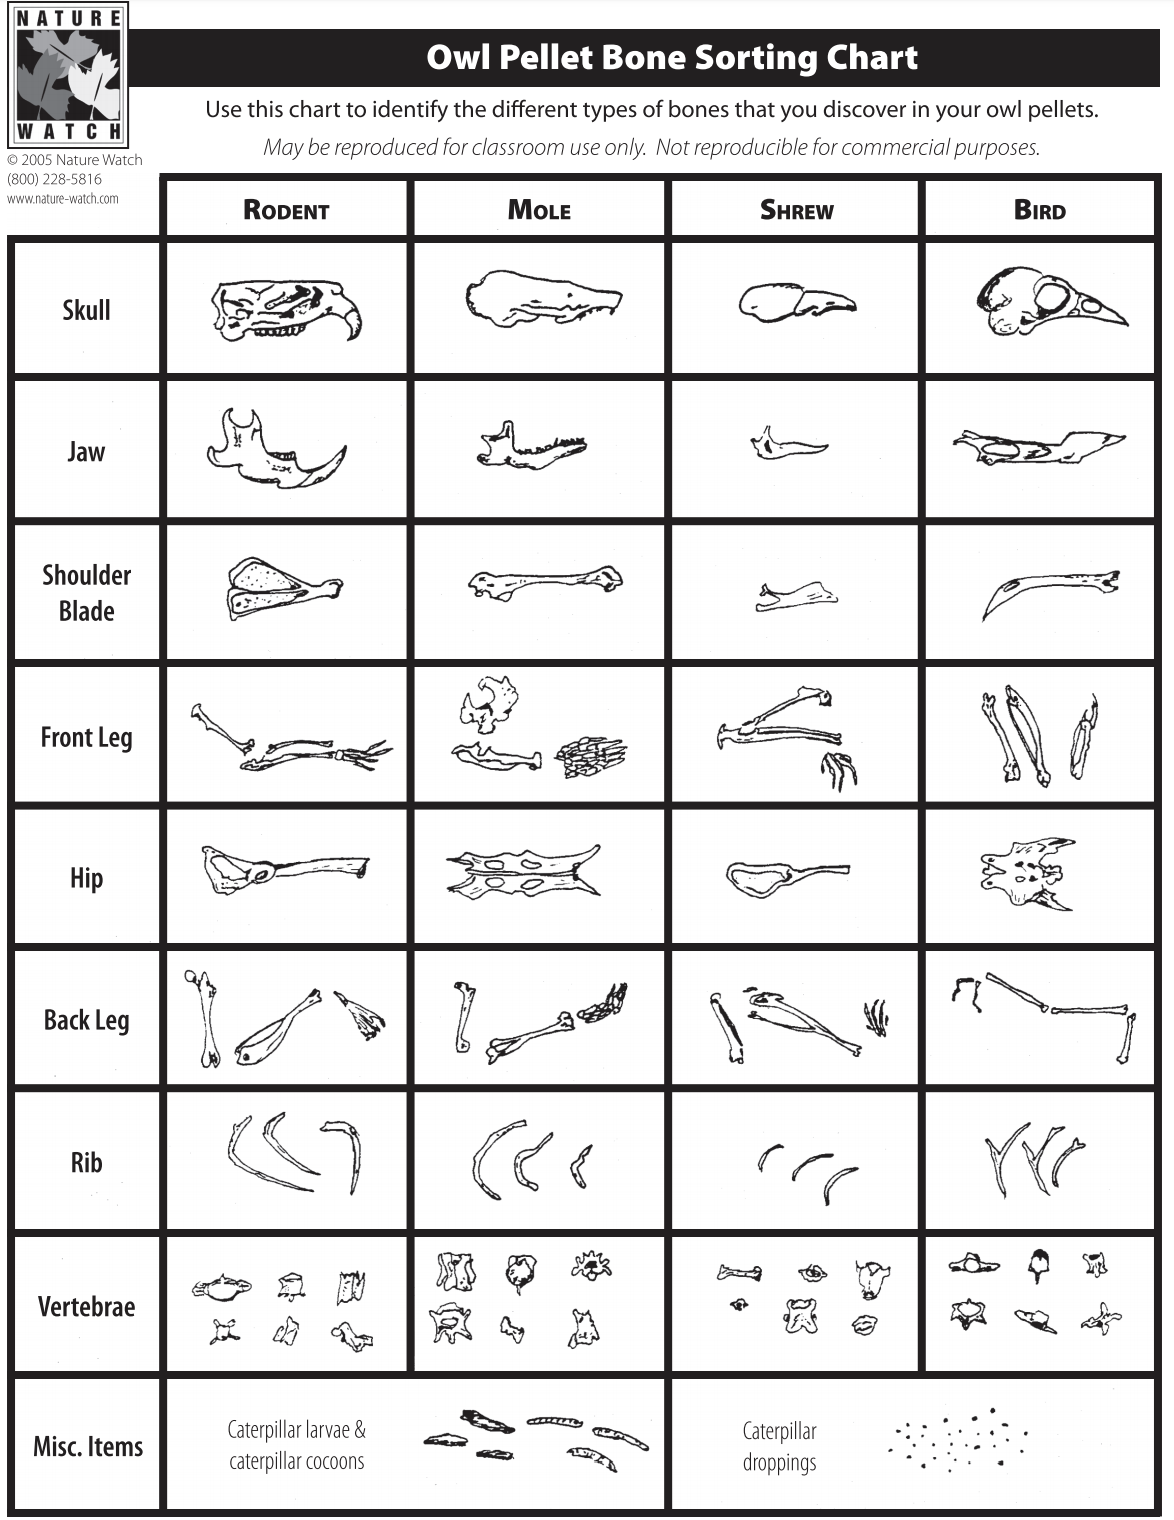 Owl pellet bone sorting chart. [Click here for source]( https://www.nature-watch.com/images/K400%20A%20and%20B%20Owl%20Pellet%20Charts.pdf)